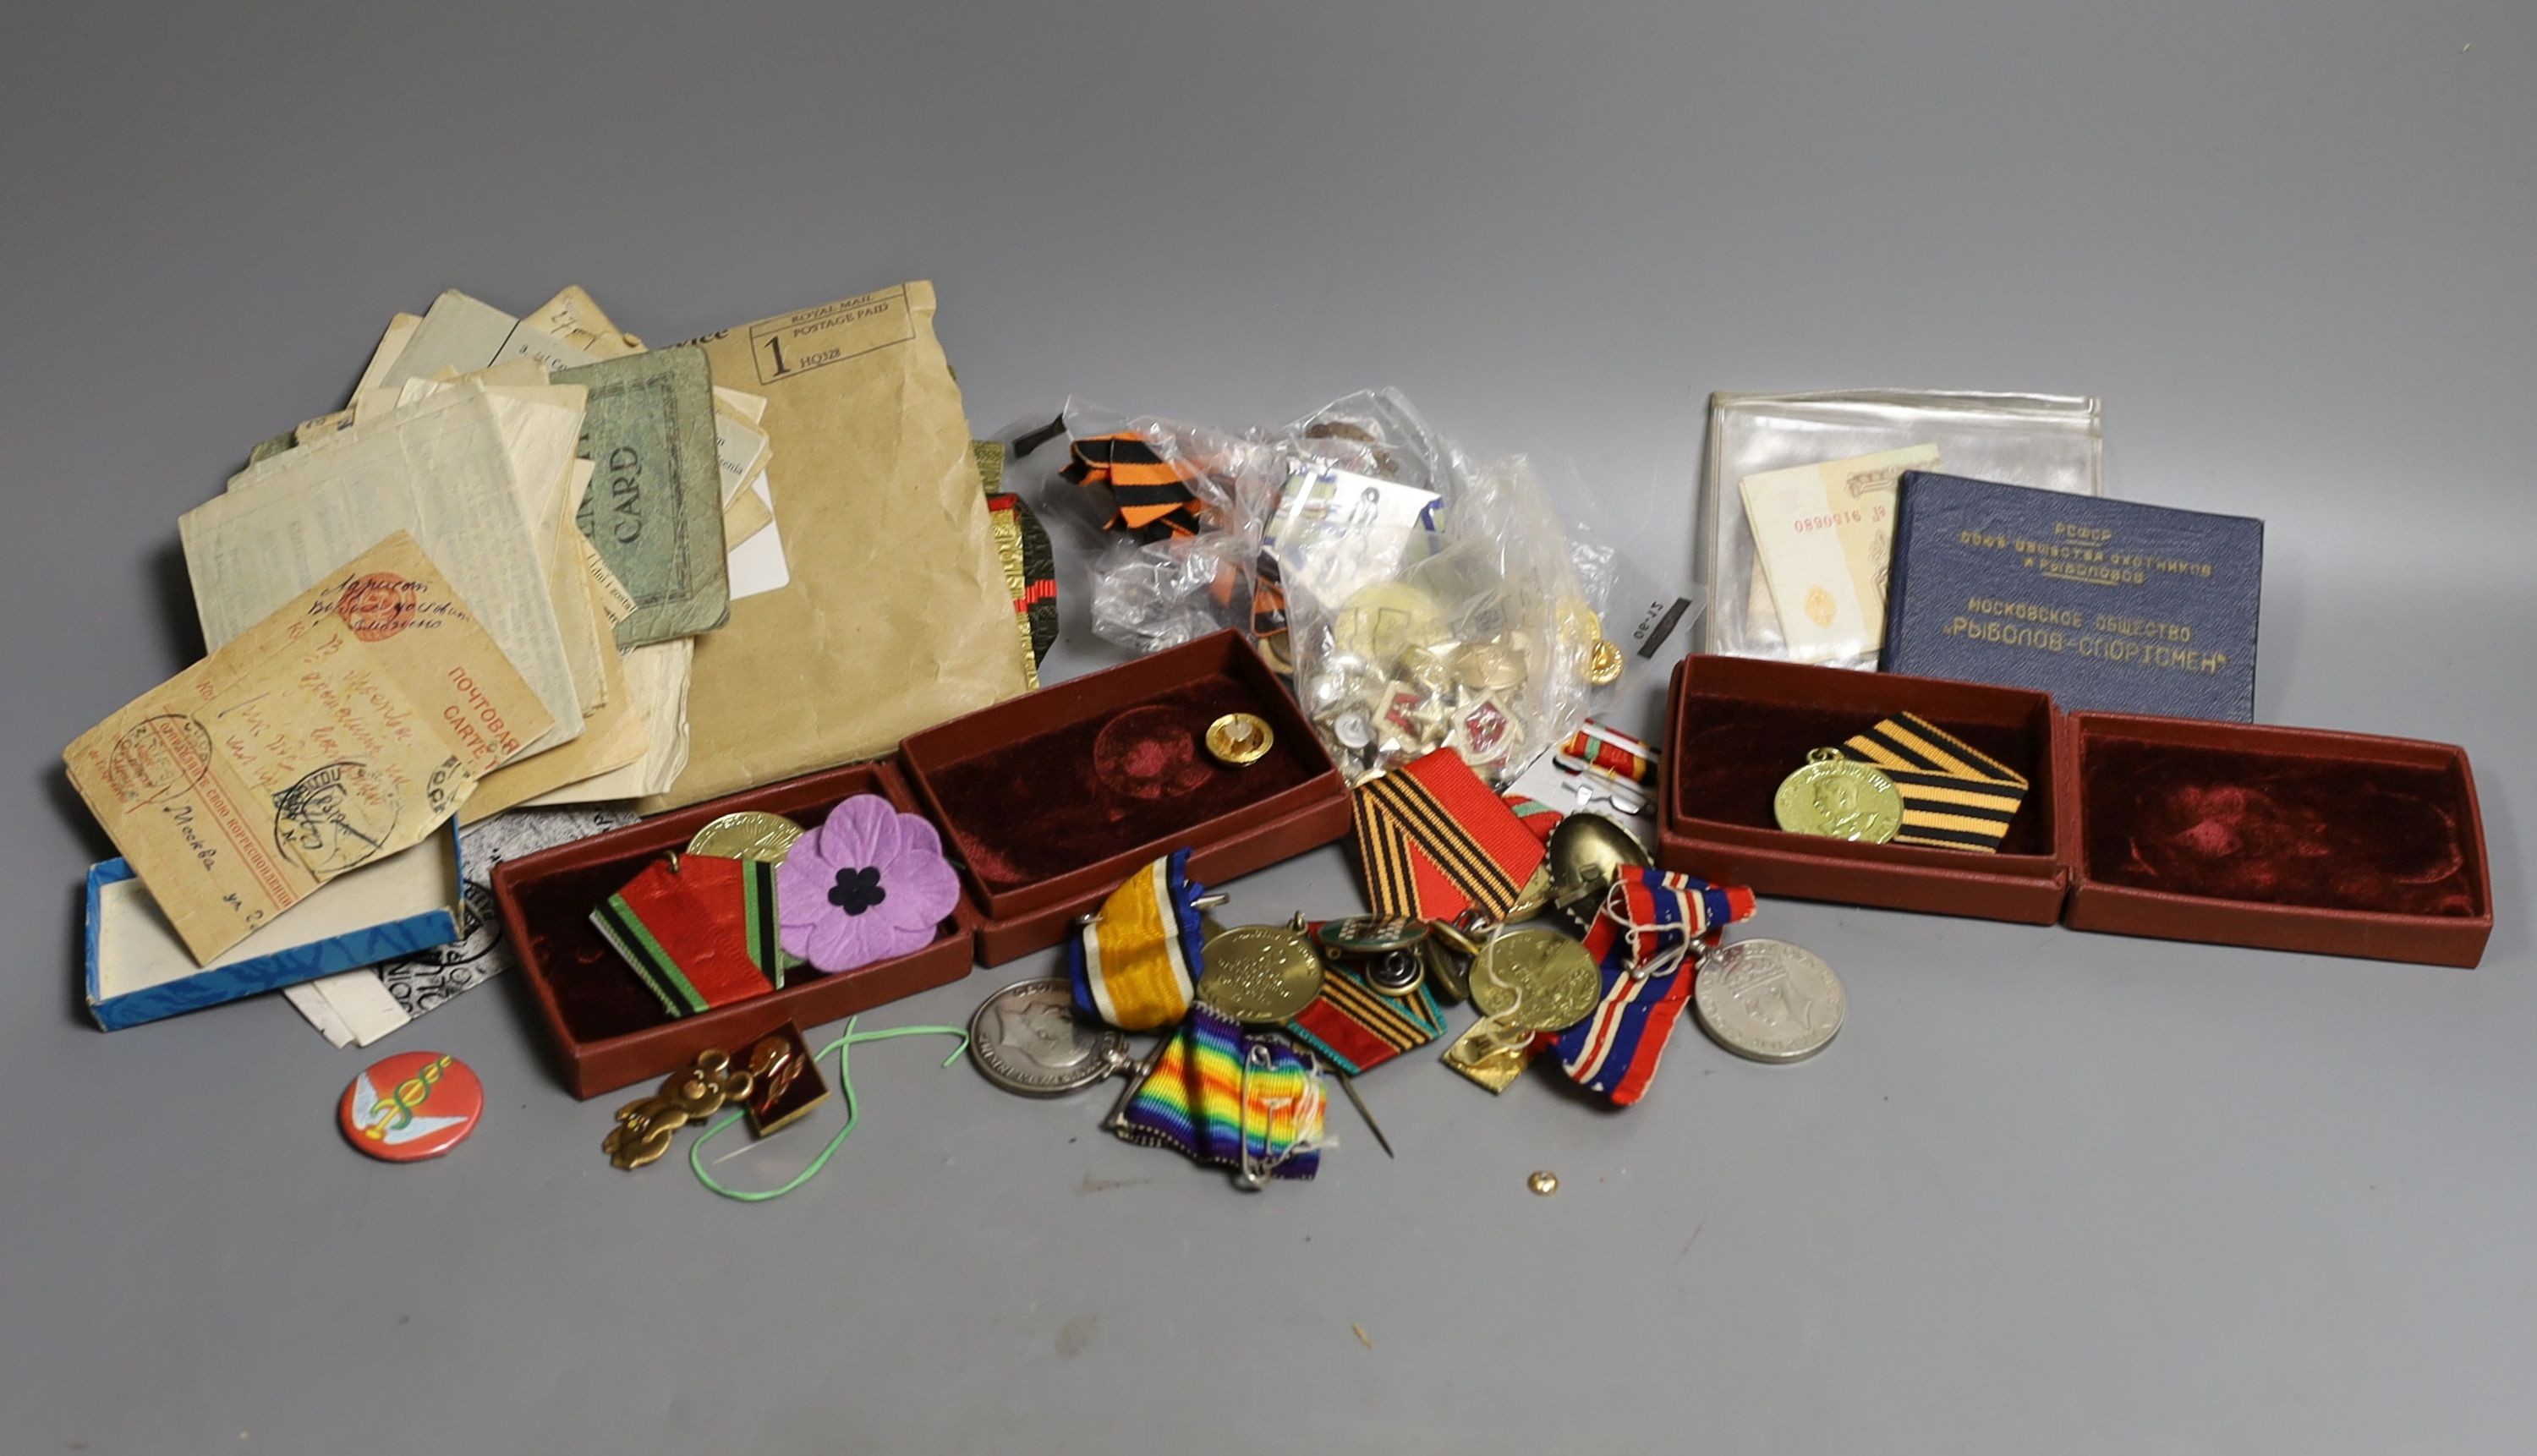 Three pairs of Polish Army shoulders pads, four U.S.S.R, Jubilee Medals, buttons, brooches and WWI medal group to Pte. G. Huggett, Royal Sussex Regiment, a WWII war medal and a USSR WWII 'Stalin' Medal.